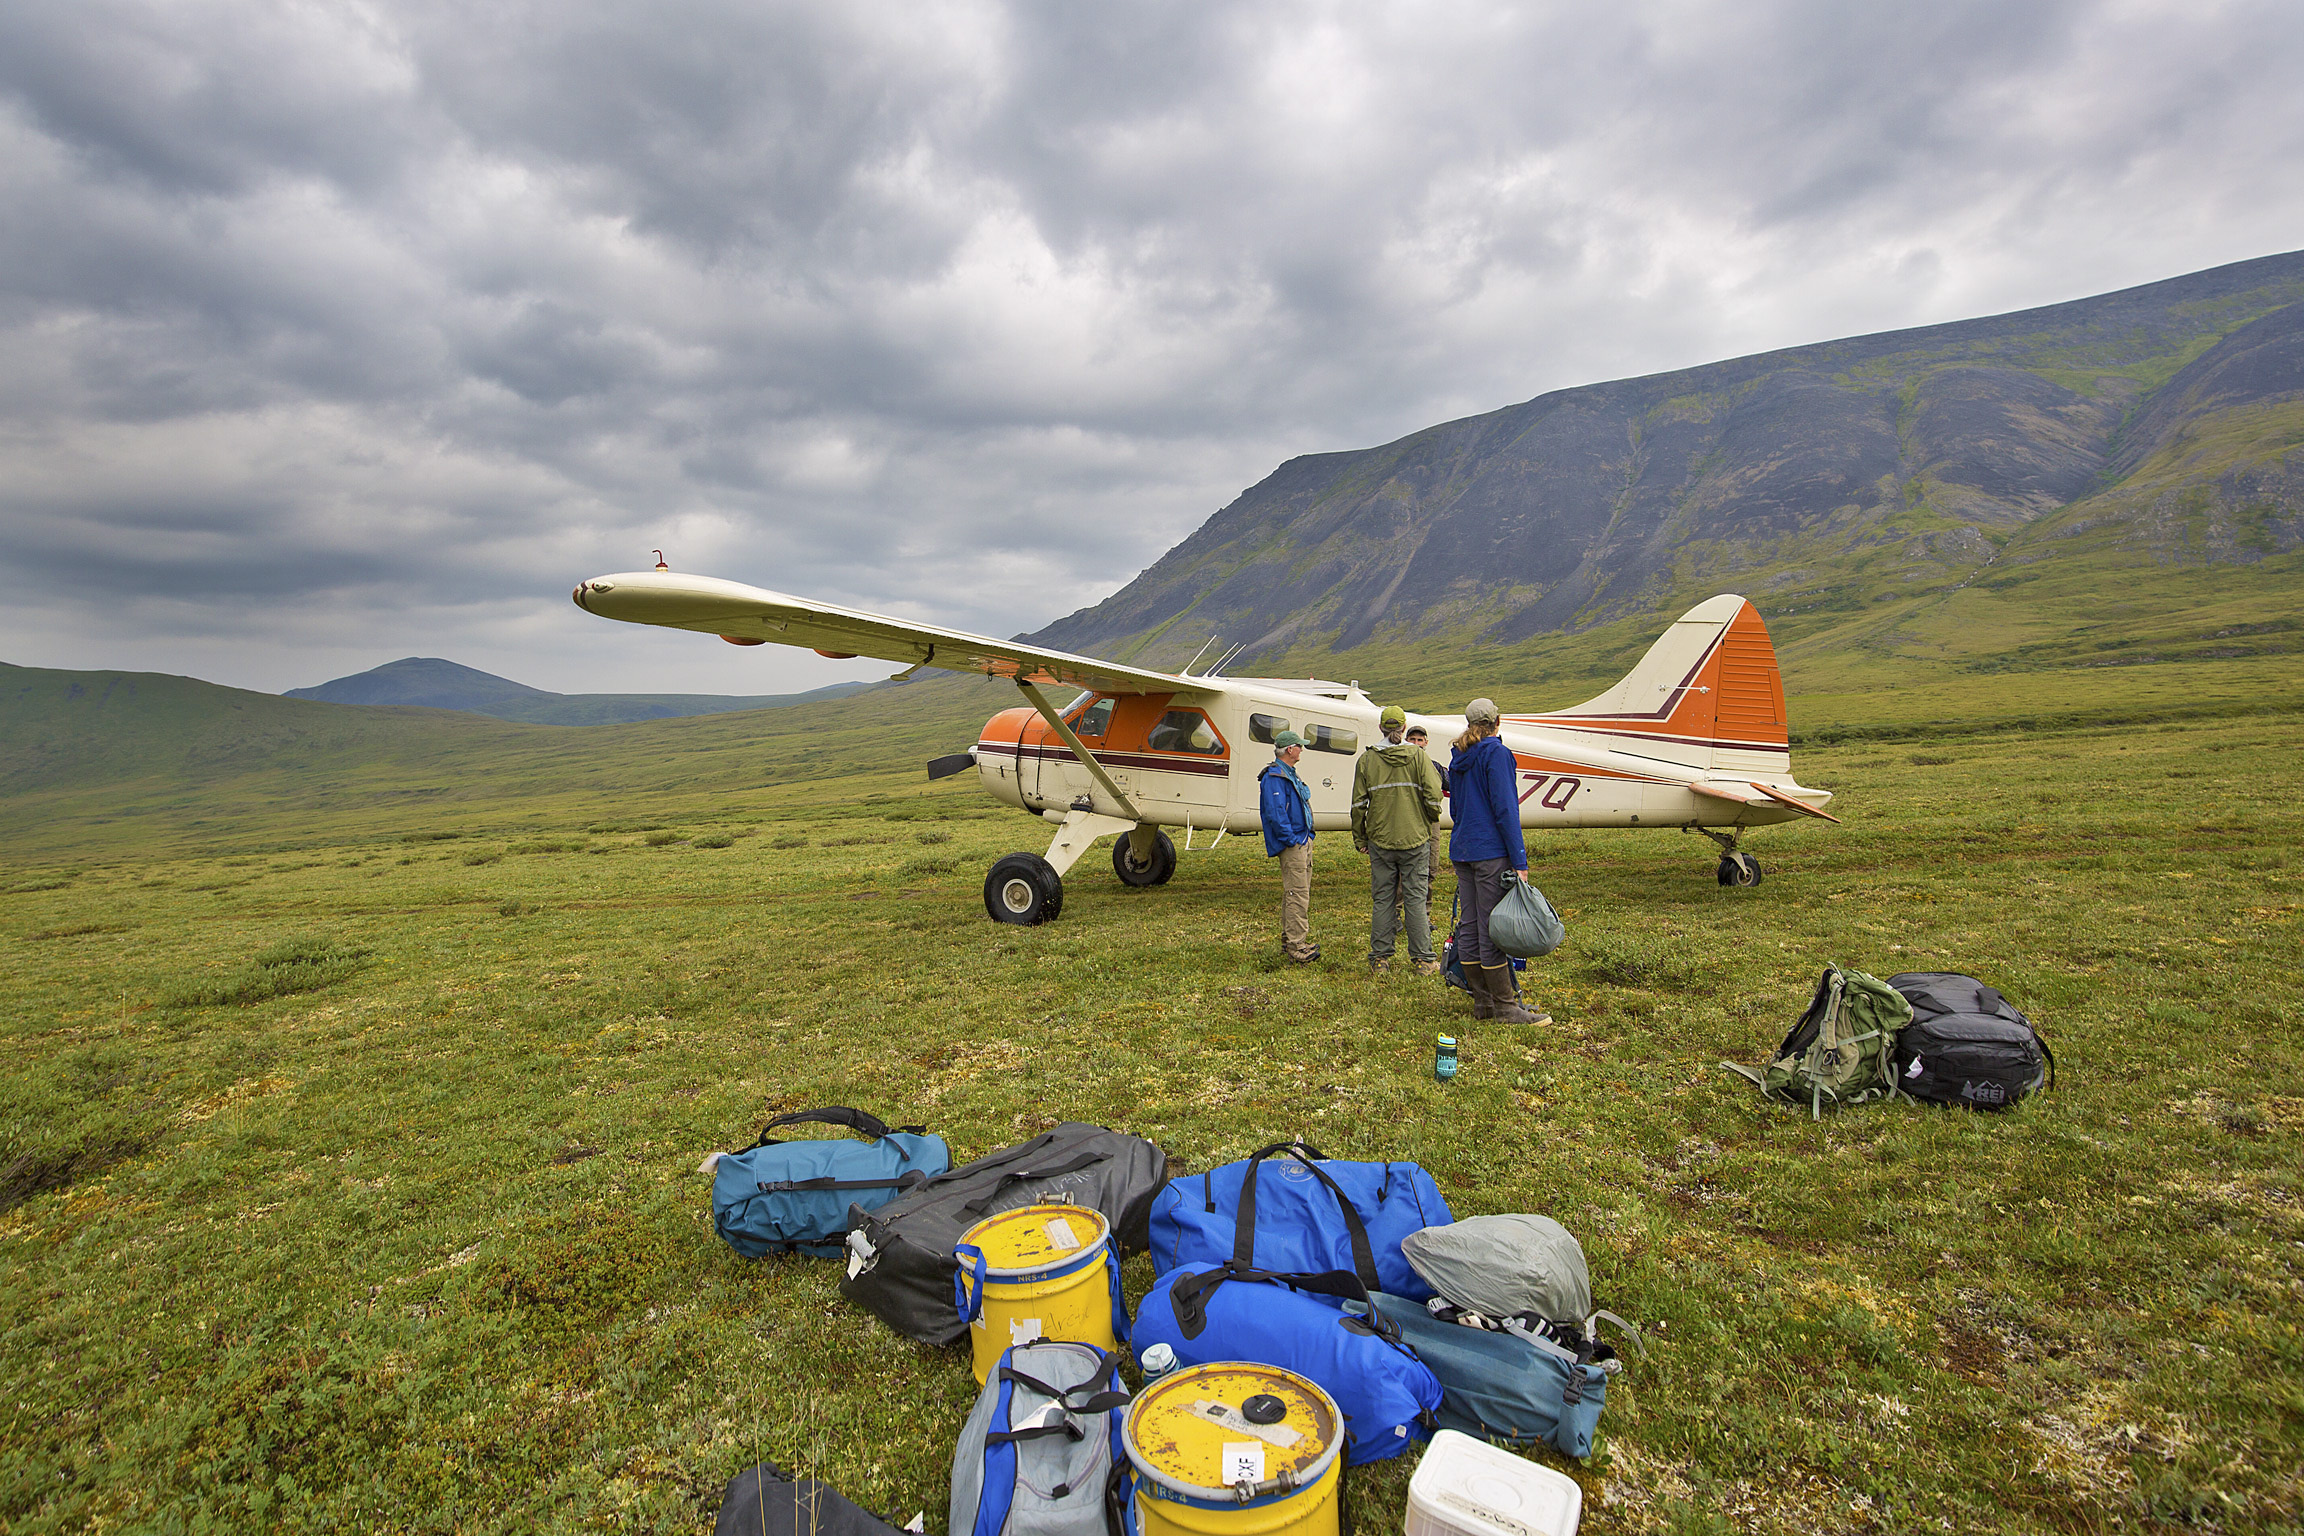 Unloading the Bush Plane in Gates of the Arctic National Park